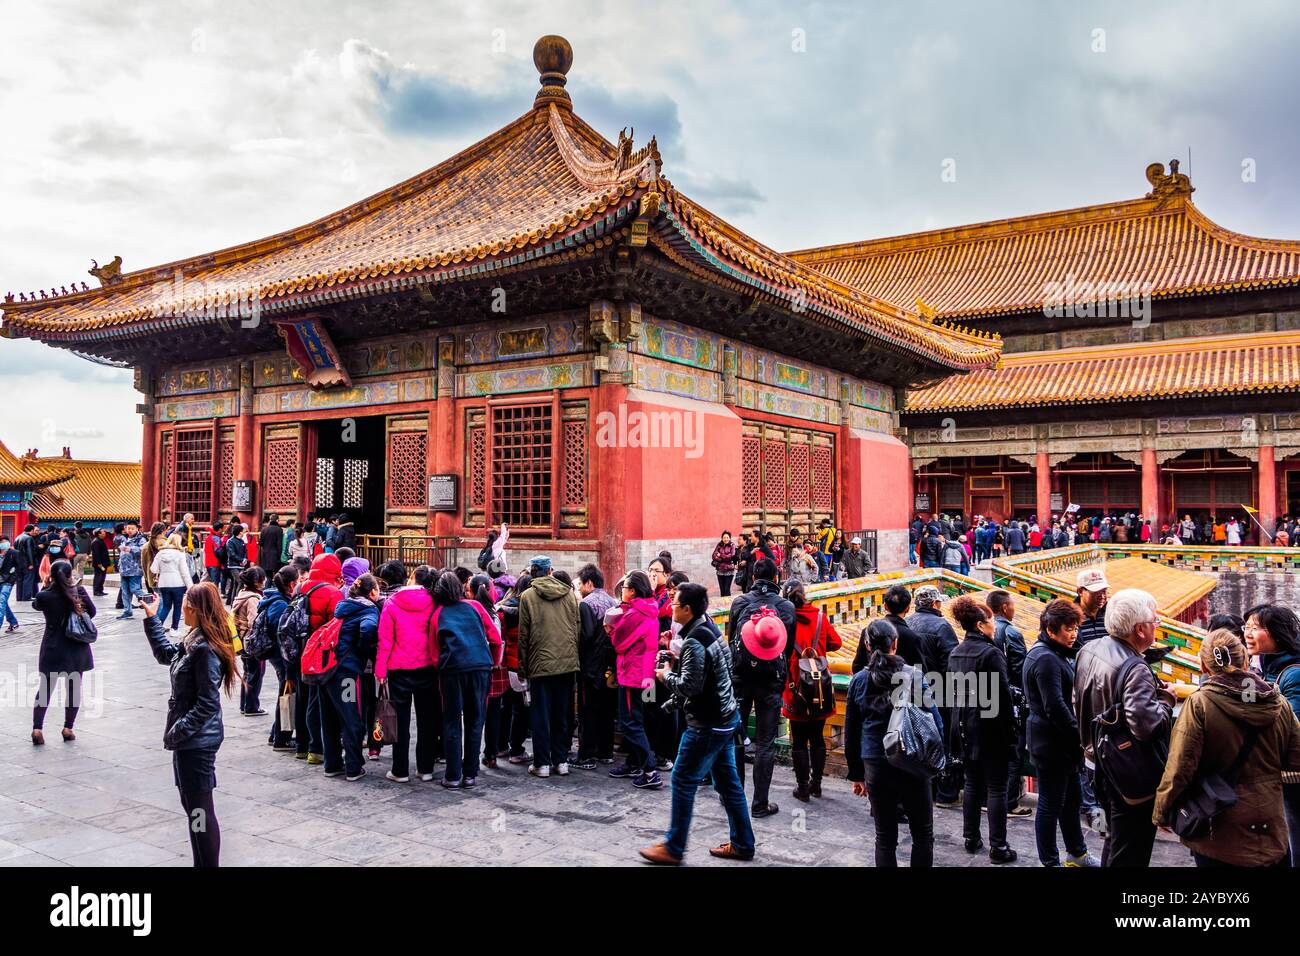 Crowd of tourists visiting Forbidden City, front view on temples Stock Photo